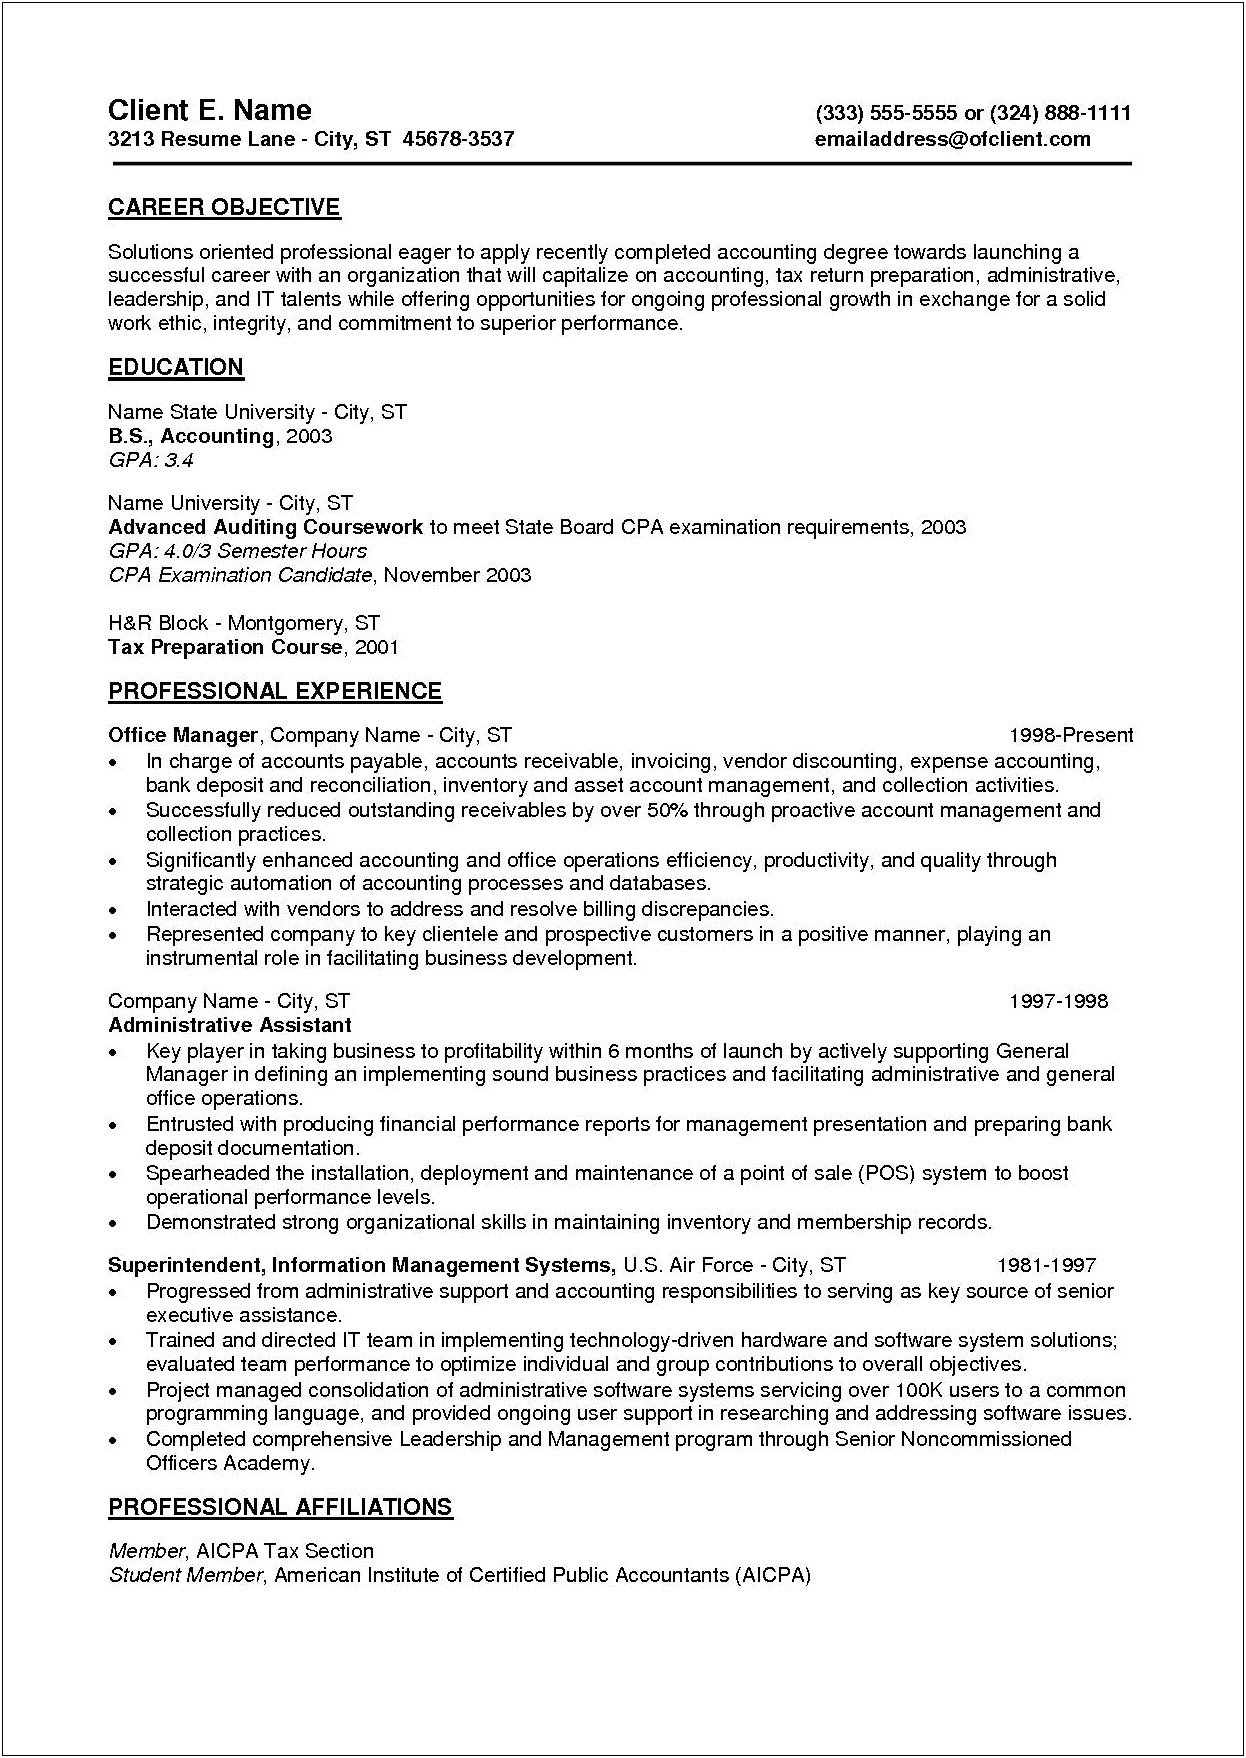 Resume With Career Objective And Profile Summary